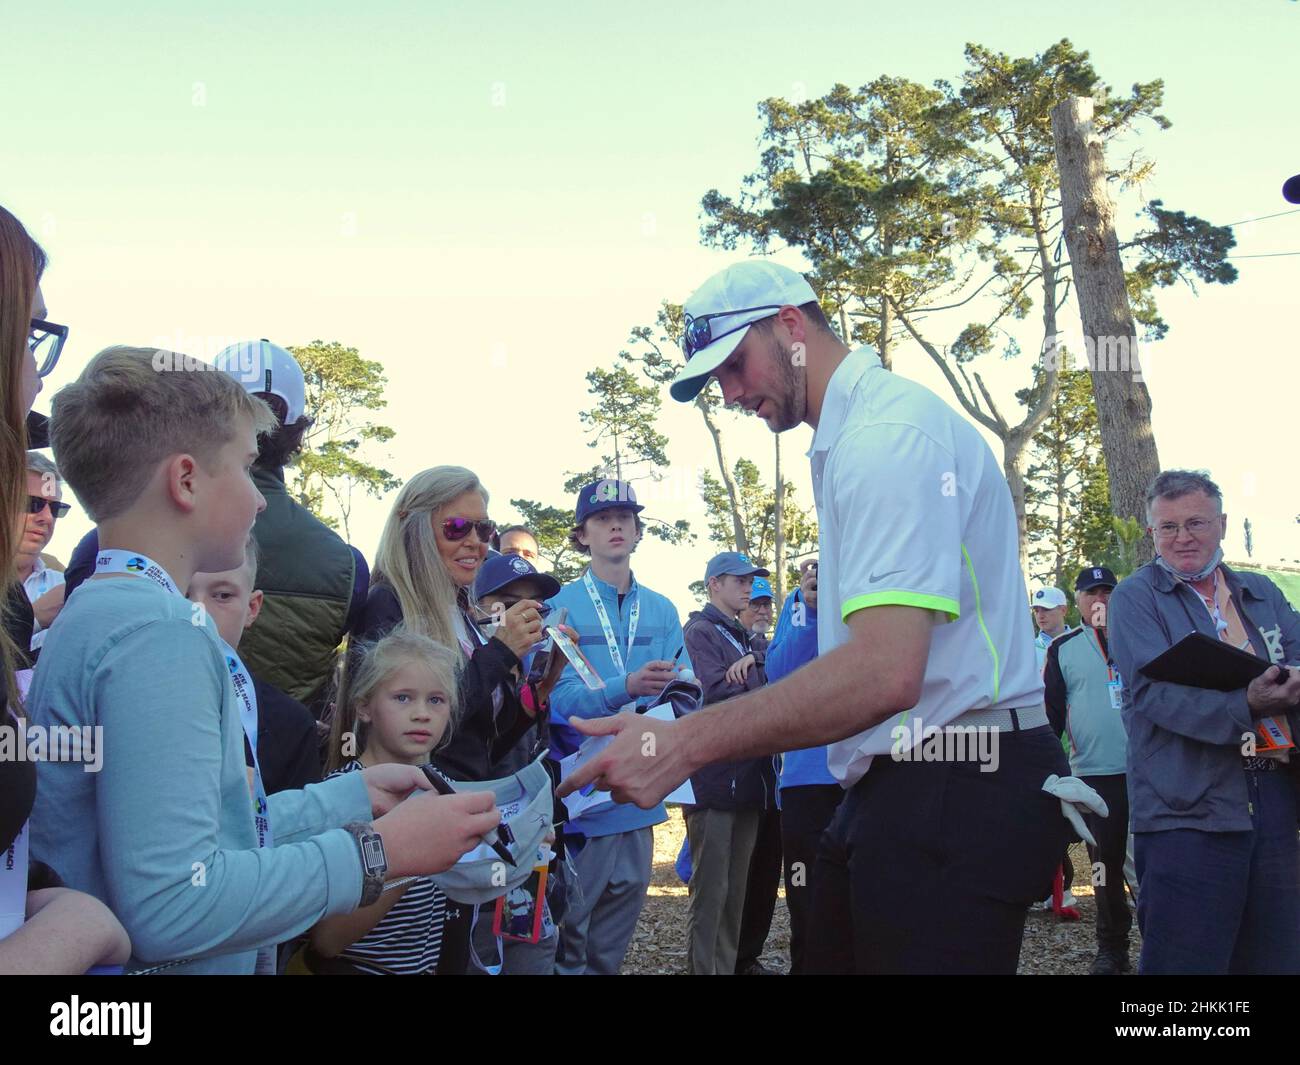 Pebble Beach, USA. 04th Feb, 2022. Josh Allen, NFL quarterback signs autographs for fans during the second round of the AT&T Pro-Am PGA Tour golf event at Spyglass Hill Golf Course, Monterey Peninsula, California, USA Credit: Motofoto/Alamy Live News Stock Photo